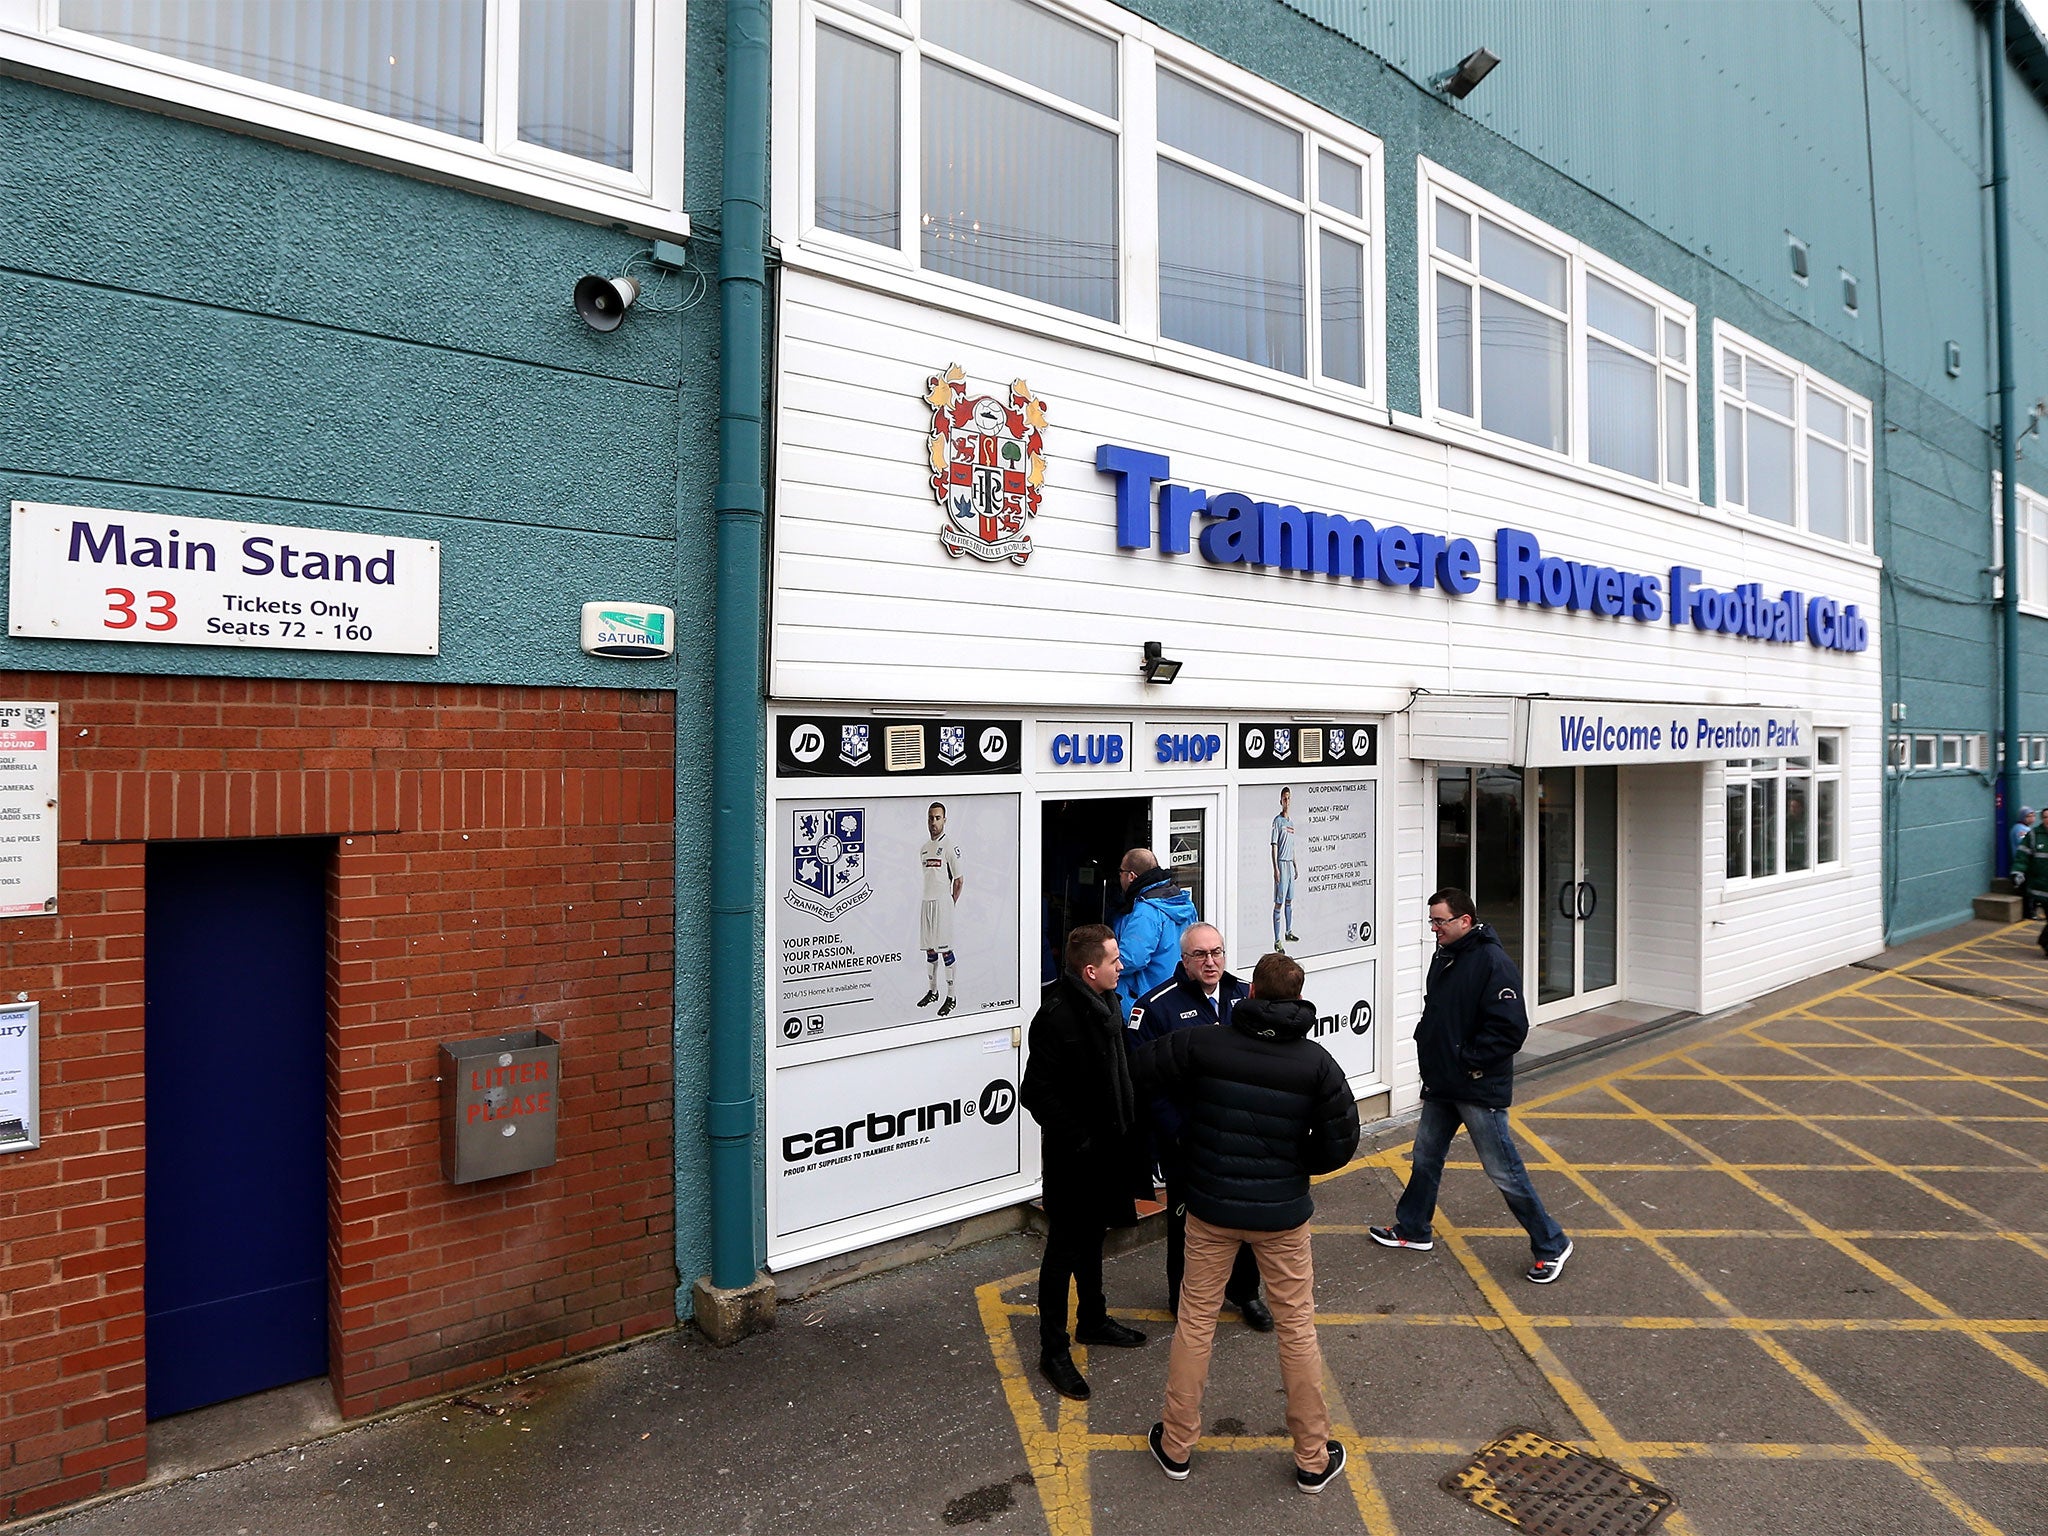 The Tranmere ship has been steadied, now it is time for progress